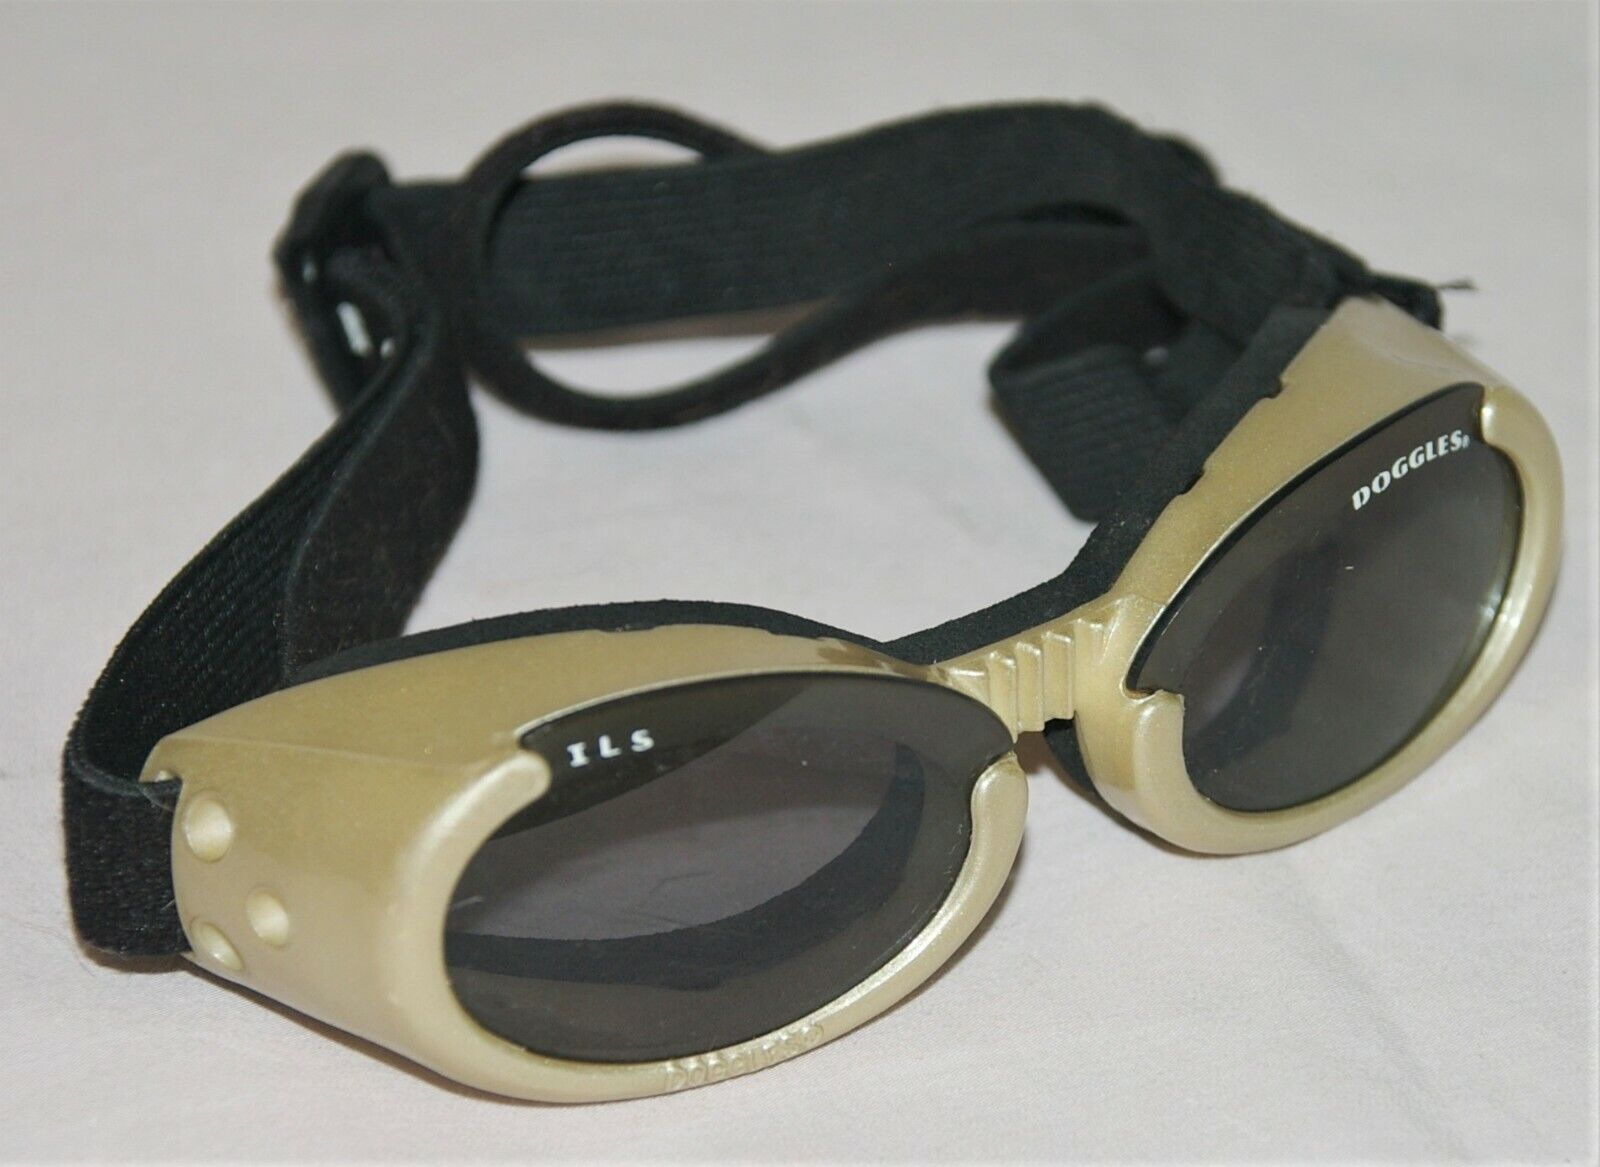 Doggles ILS - Goggles with Smoke Lens for Small Dogs